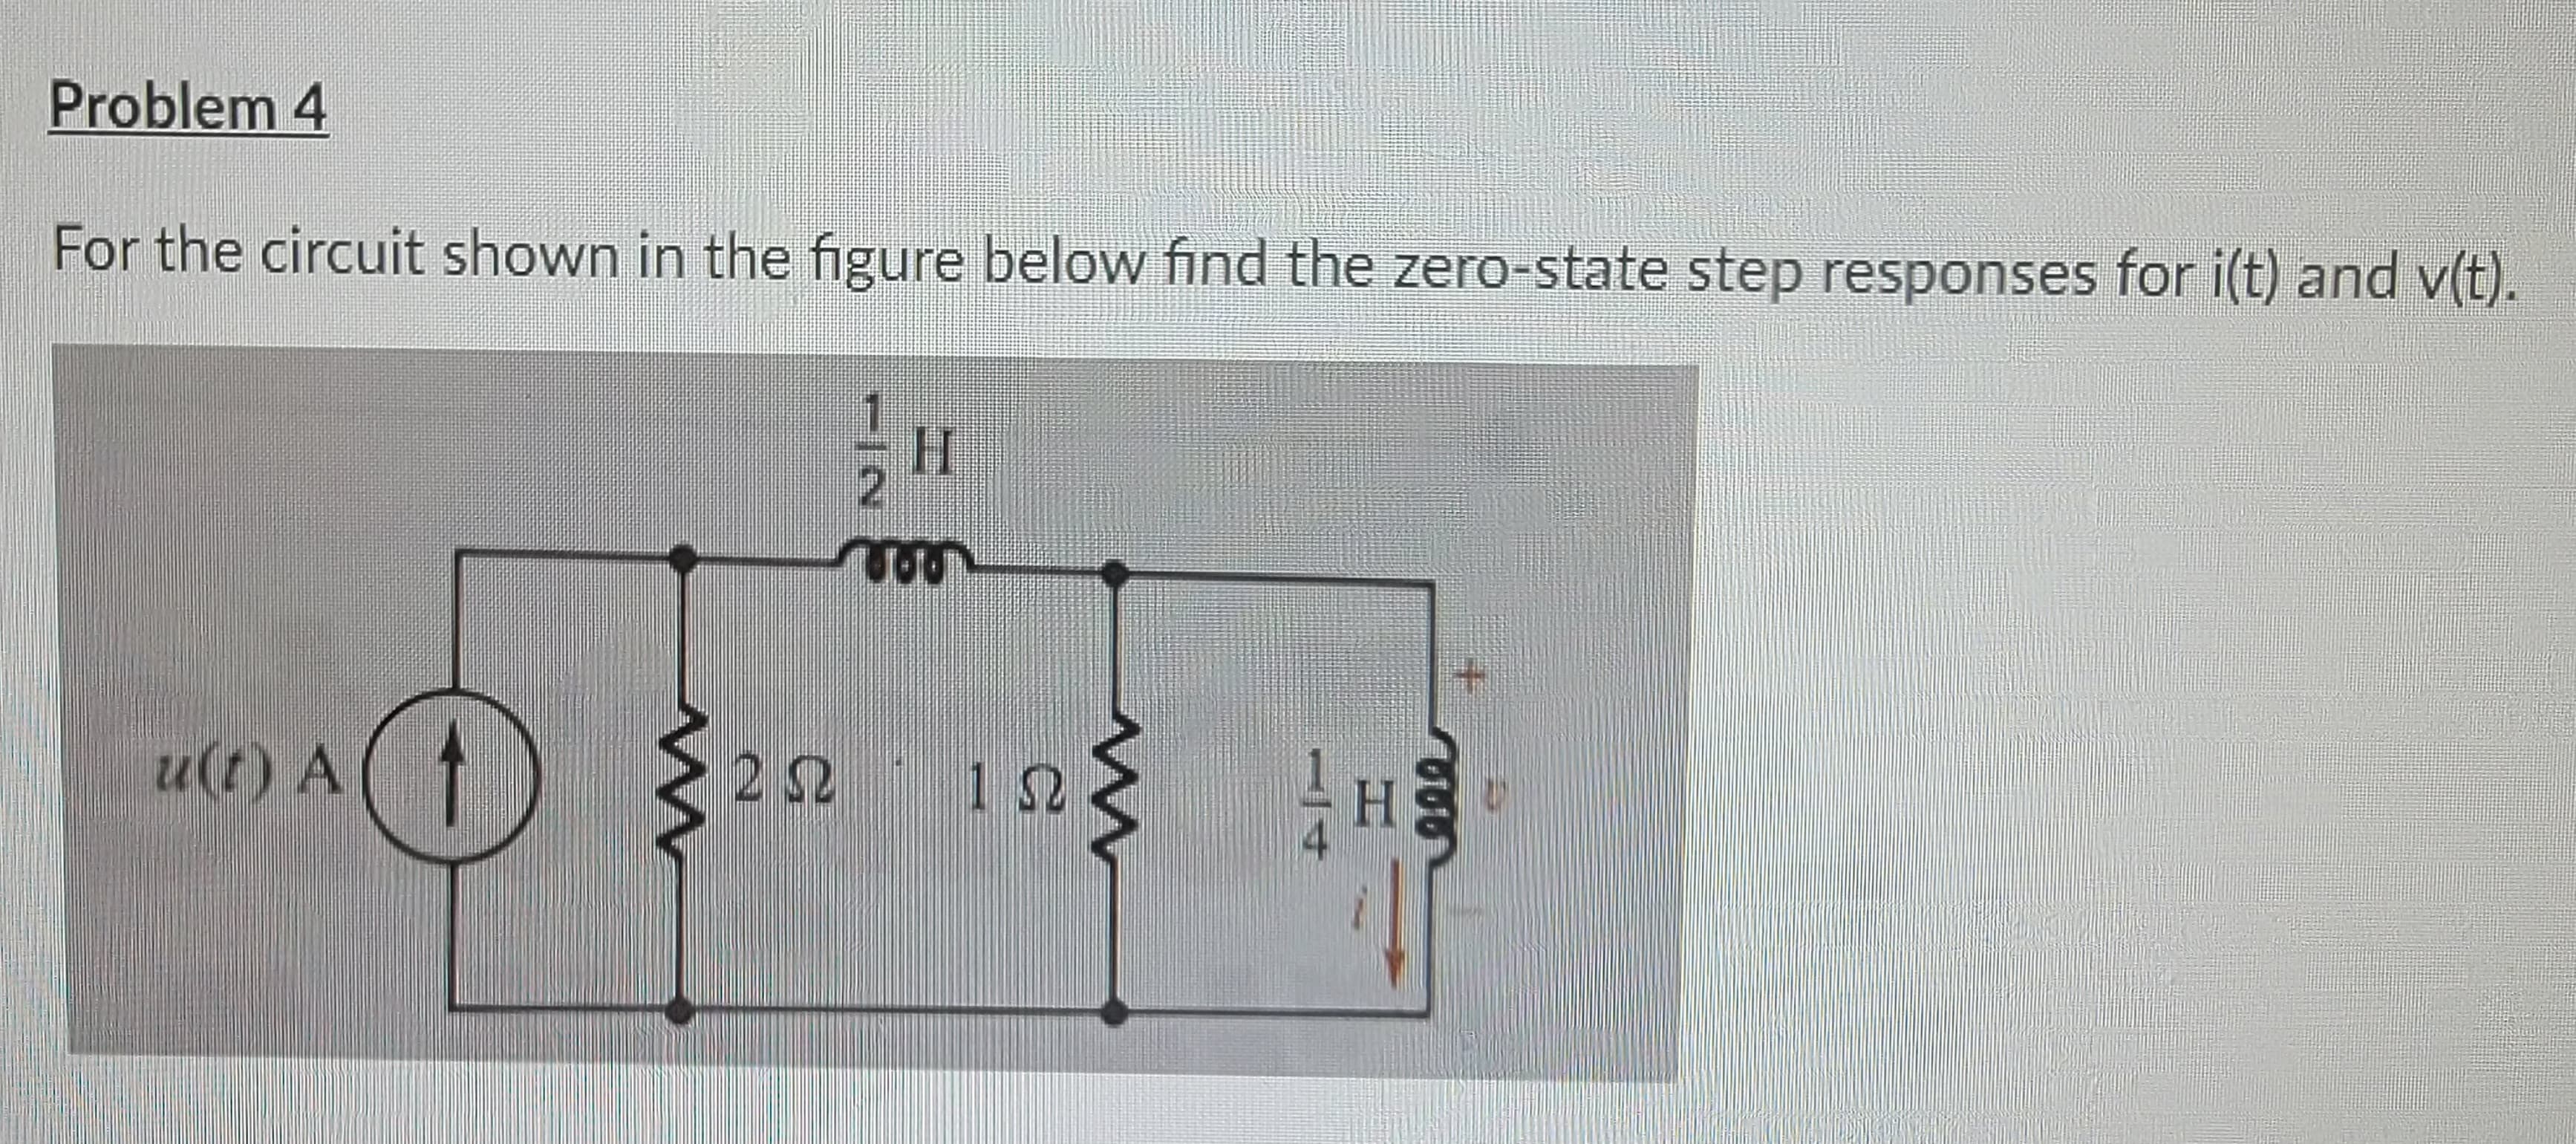 Problem 4
For the circuit shown in the figure below find the zero-state step responses for i(t) and v(t).
D
u(t) A t
W
FİN
H
moo
2
252
282 182
w
4 HE